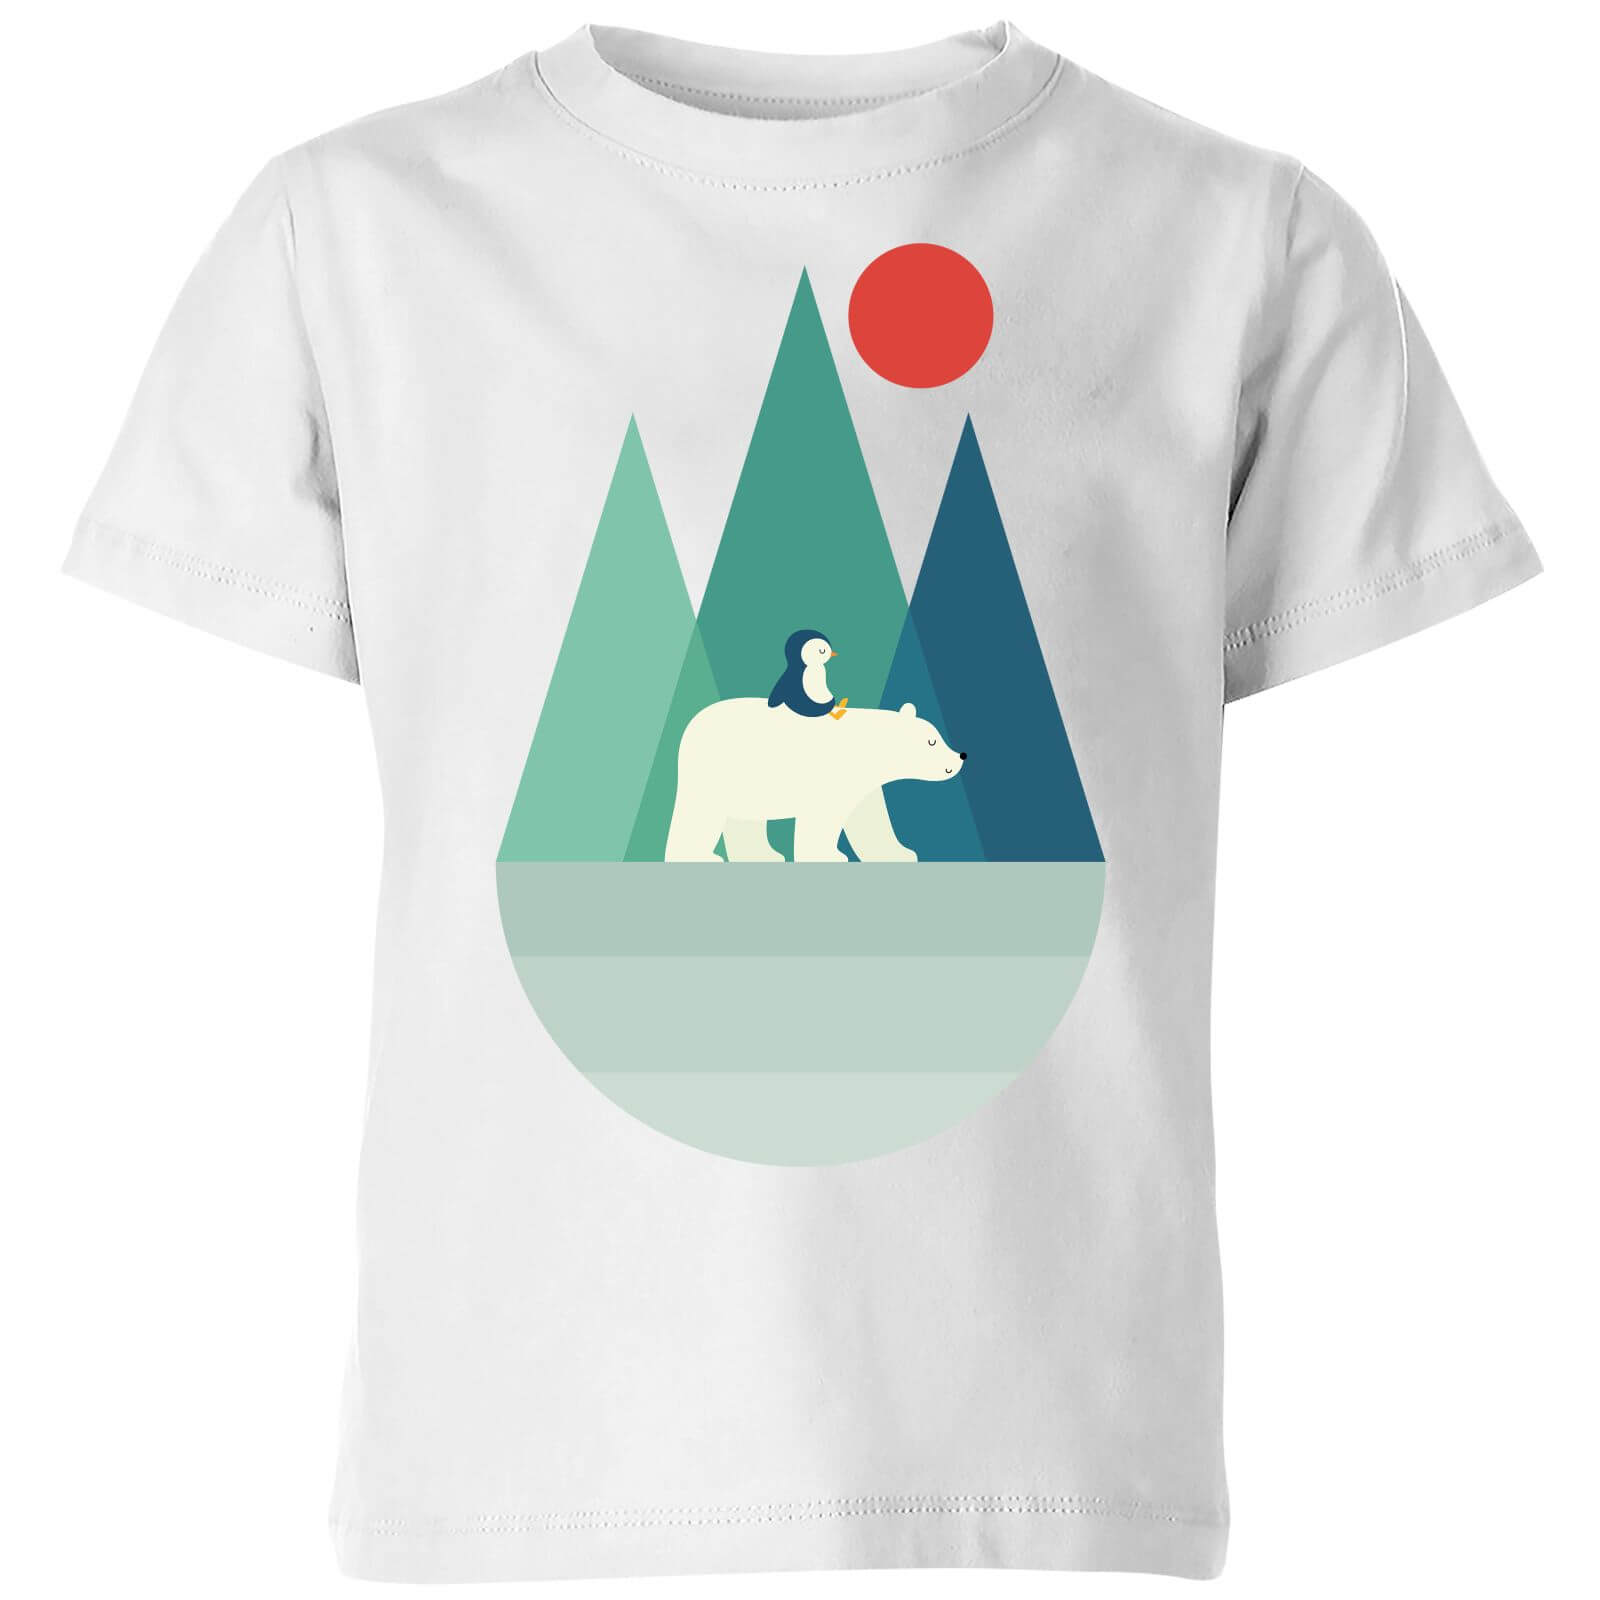 Andy Westface Bear You Kids' T-Shirt - White - 3-4 Years - White